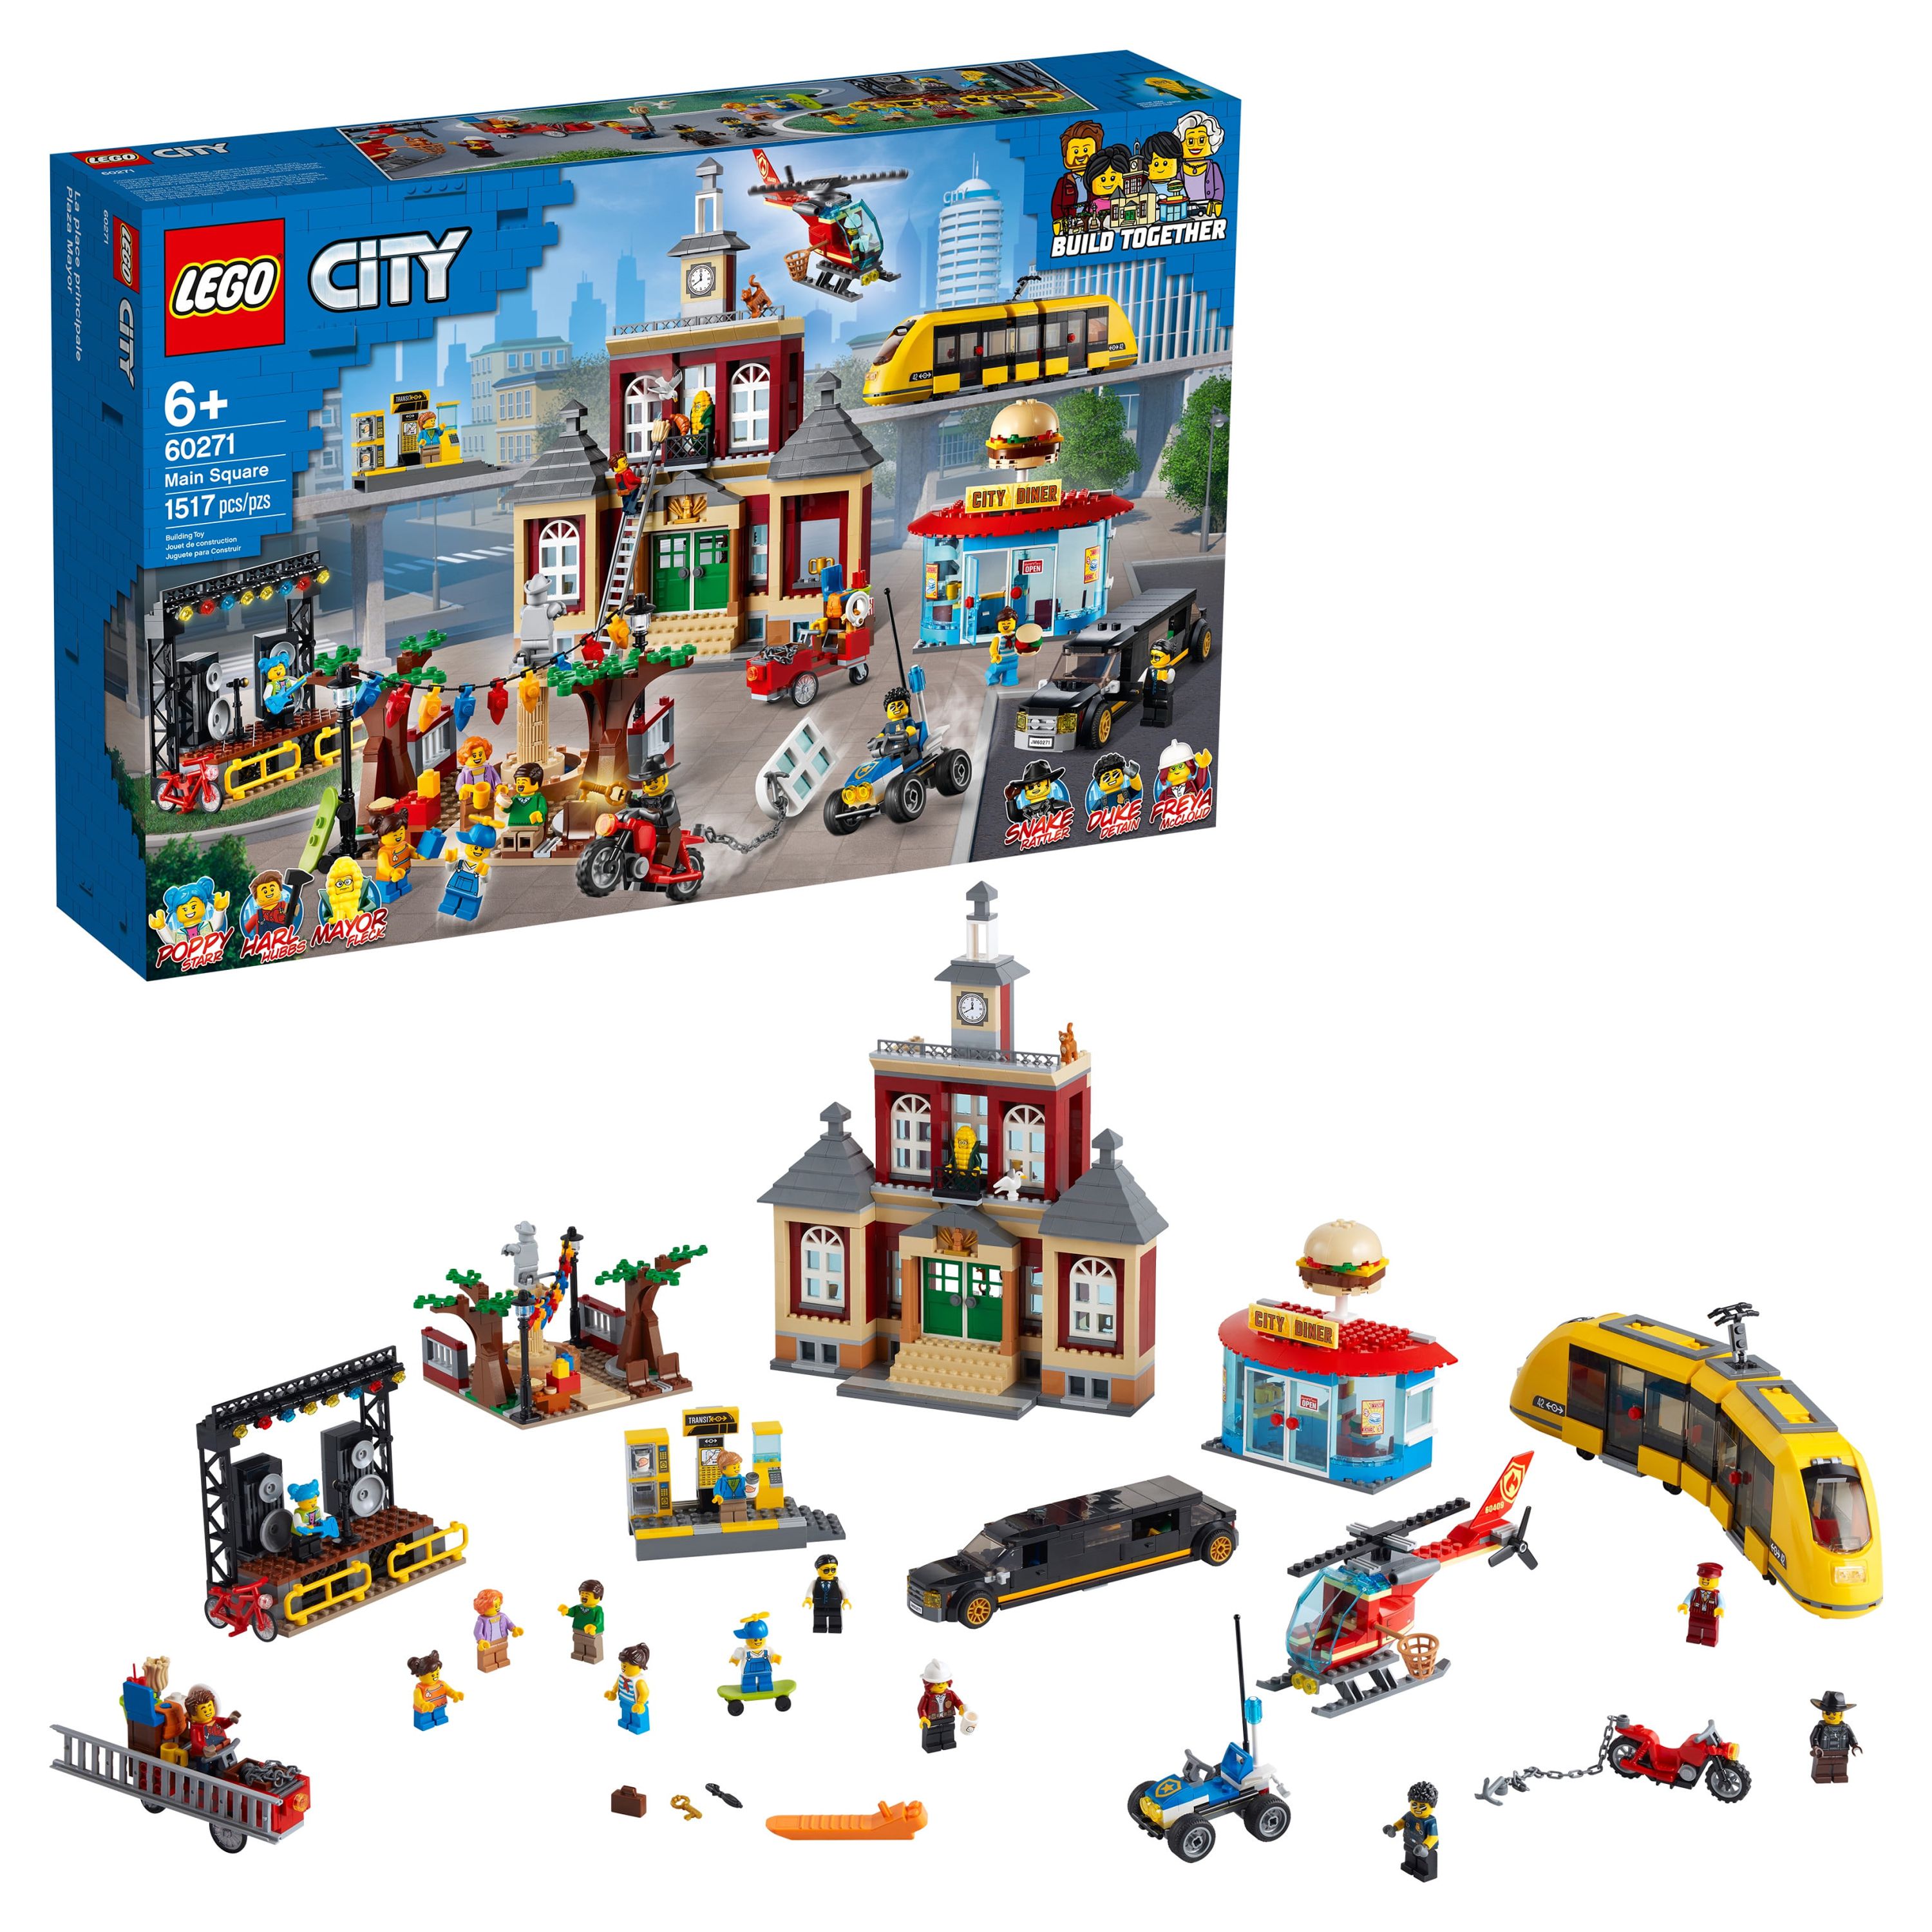 LEGO City Main Square 60271 Cool Building Toy for Kids (1,517 Pieces) - image 1 of 7